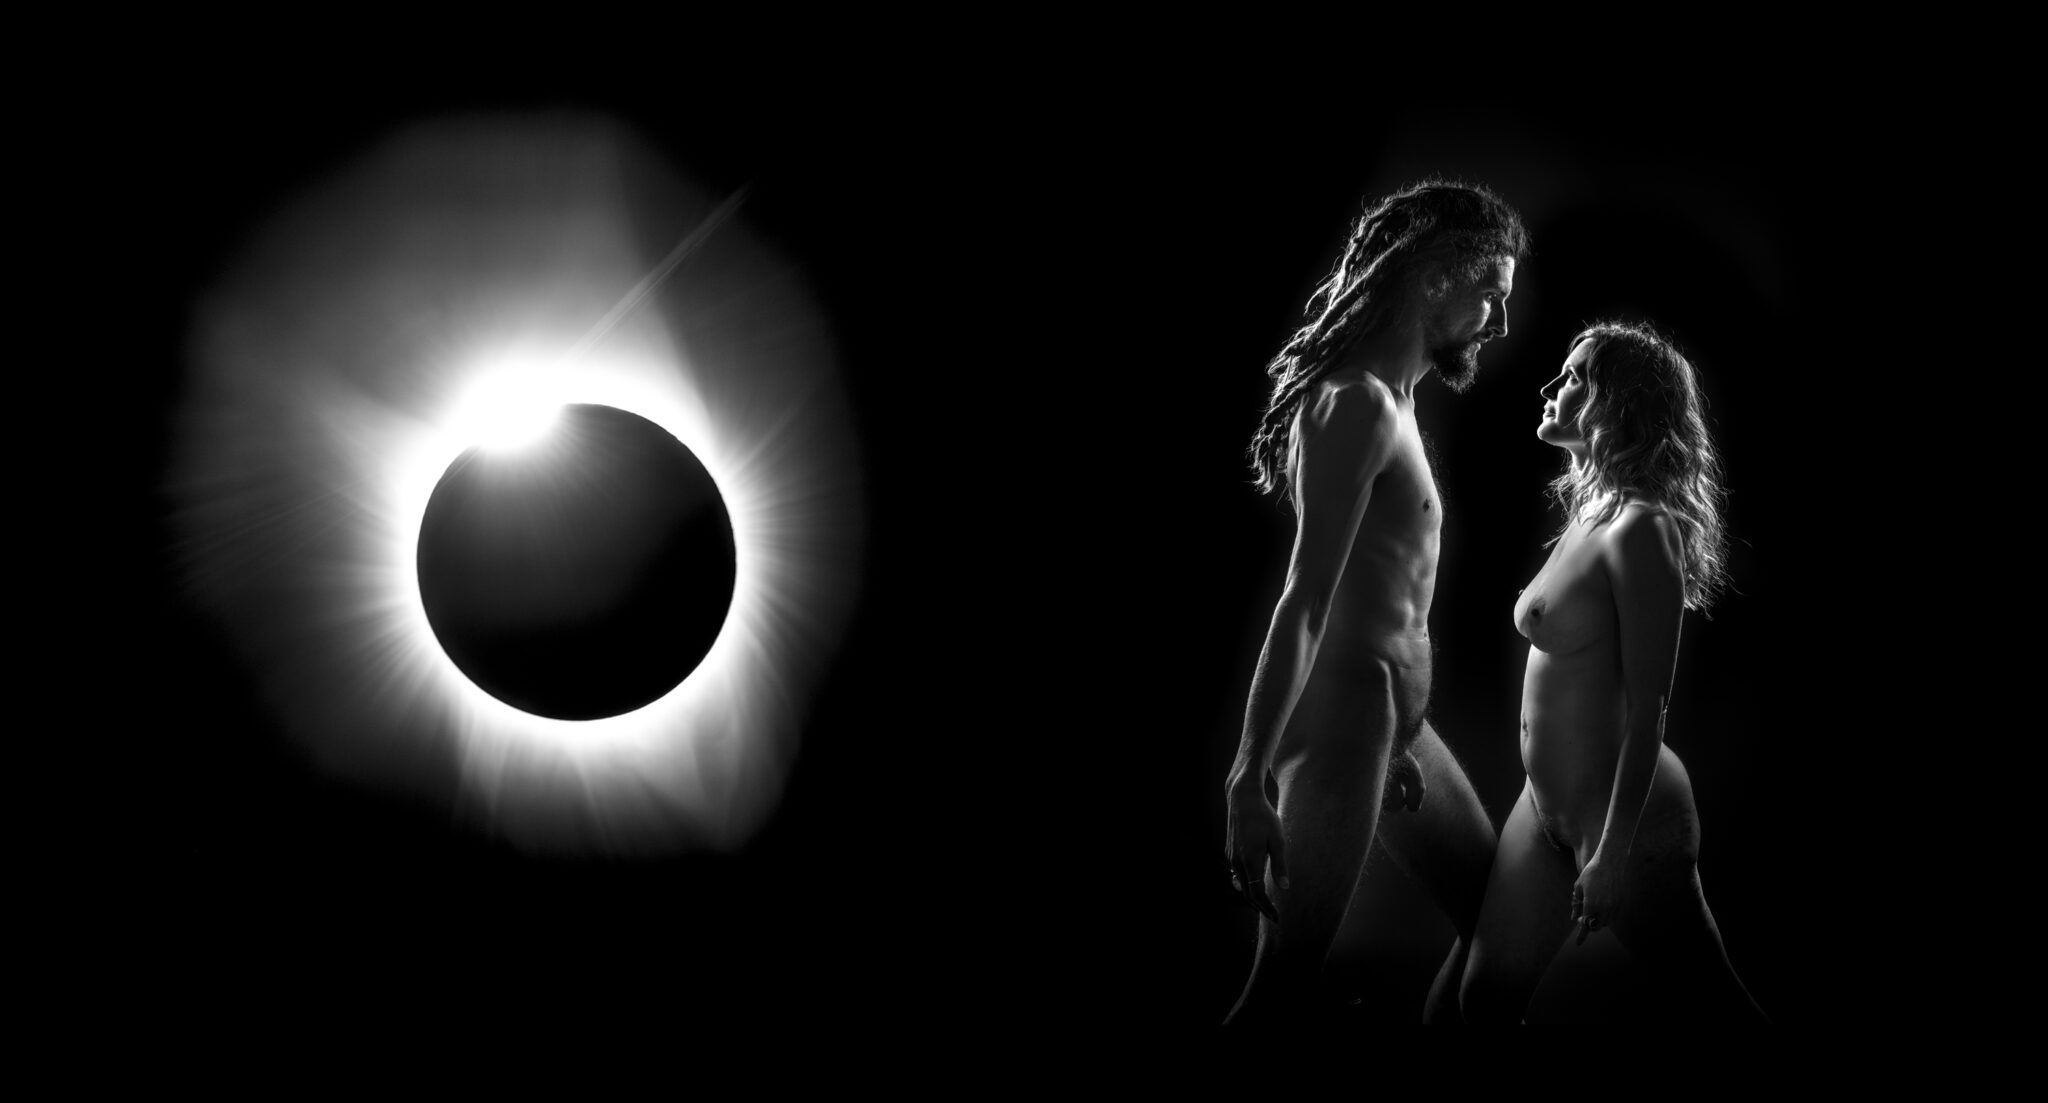 A black and white photograph of a naked man and woman face each other with arms by their side and gaze into each other eyes against a backdrop of the solar eclipse at the moment known as the wedding ring.